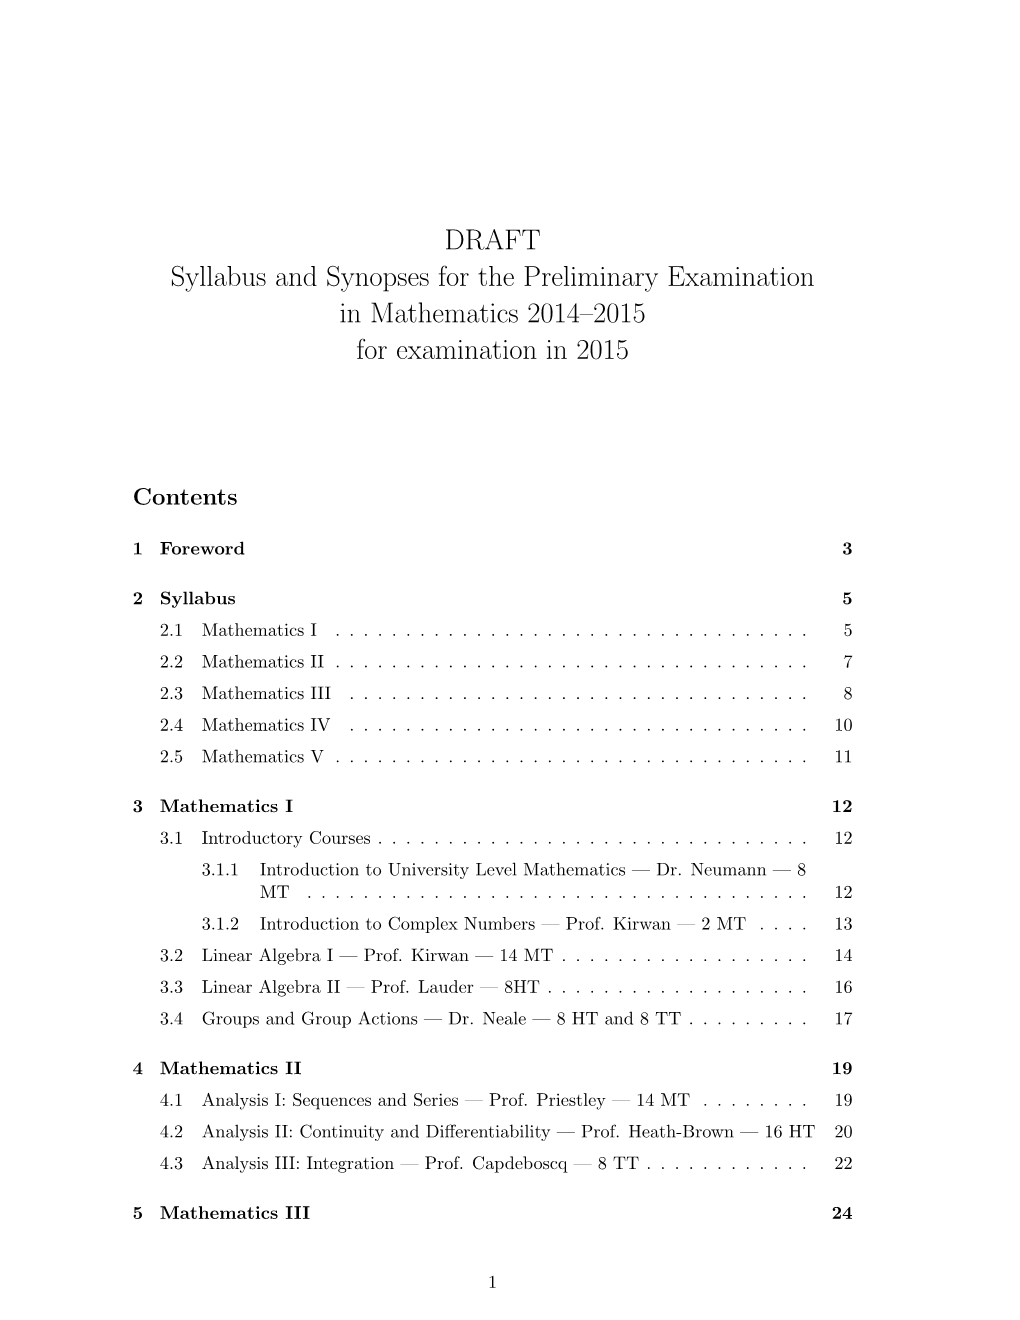 DRAFT Syllabus and Synopses for the Preliminary Examination in Mathematics 2014–2015 for Examination in 2015